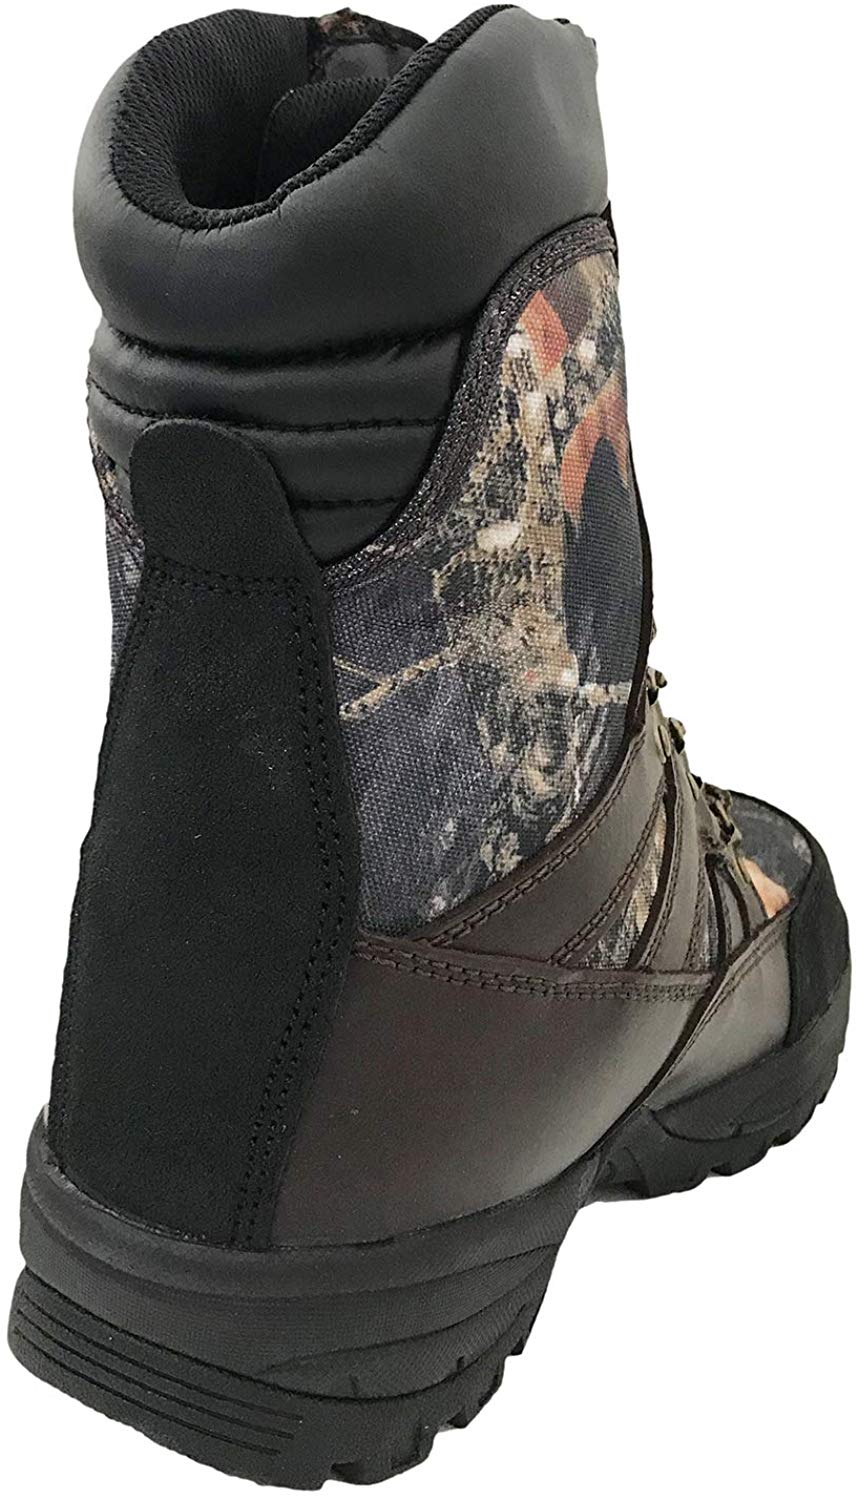 Men's Hunting Boot Waterproof 600 Grams Insulated 9" Interceptor Snow Hiking Shoes - image 2 of 6